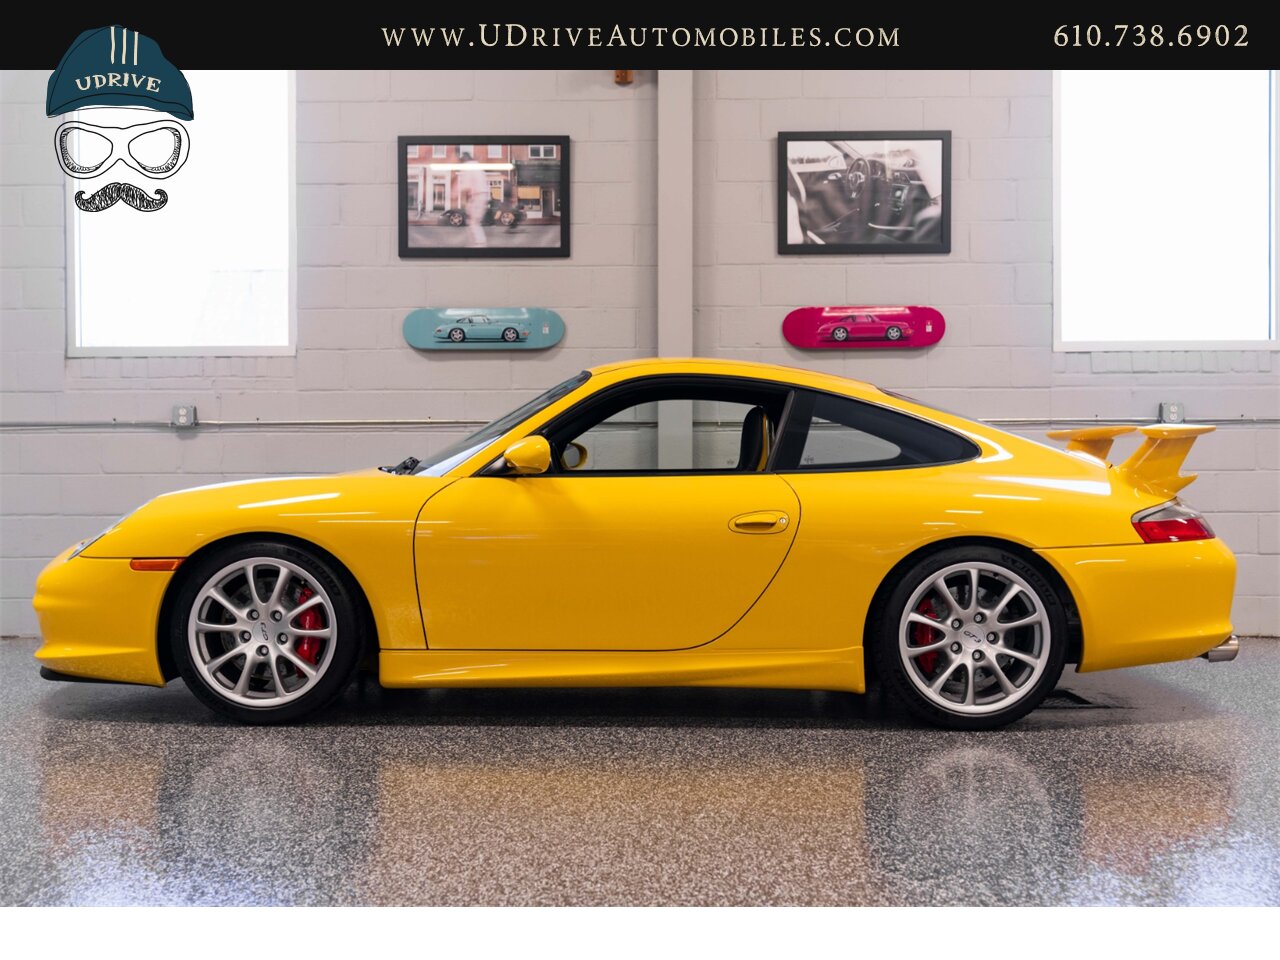 2005 Porsche 911 GT3 996 Speed Yellow Sport Seats Pntd Hardbacks  Pntd Console Deviating Stitch Yellow Accents Throughout - Photo 8 - West Chester, PA 19382